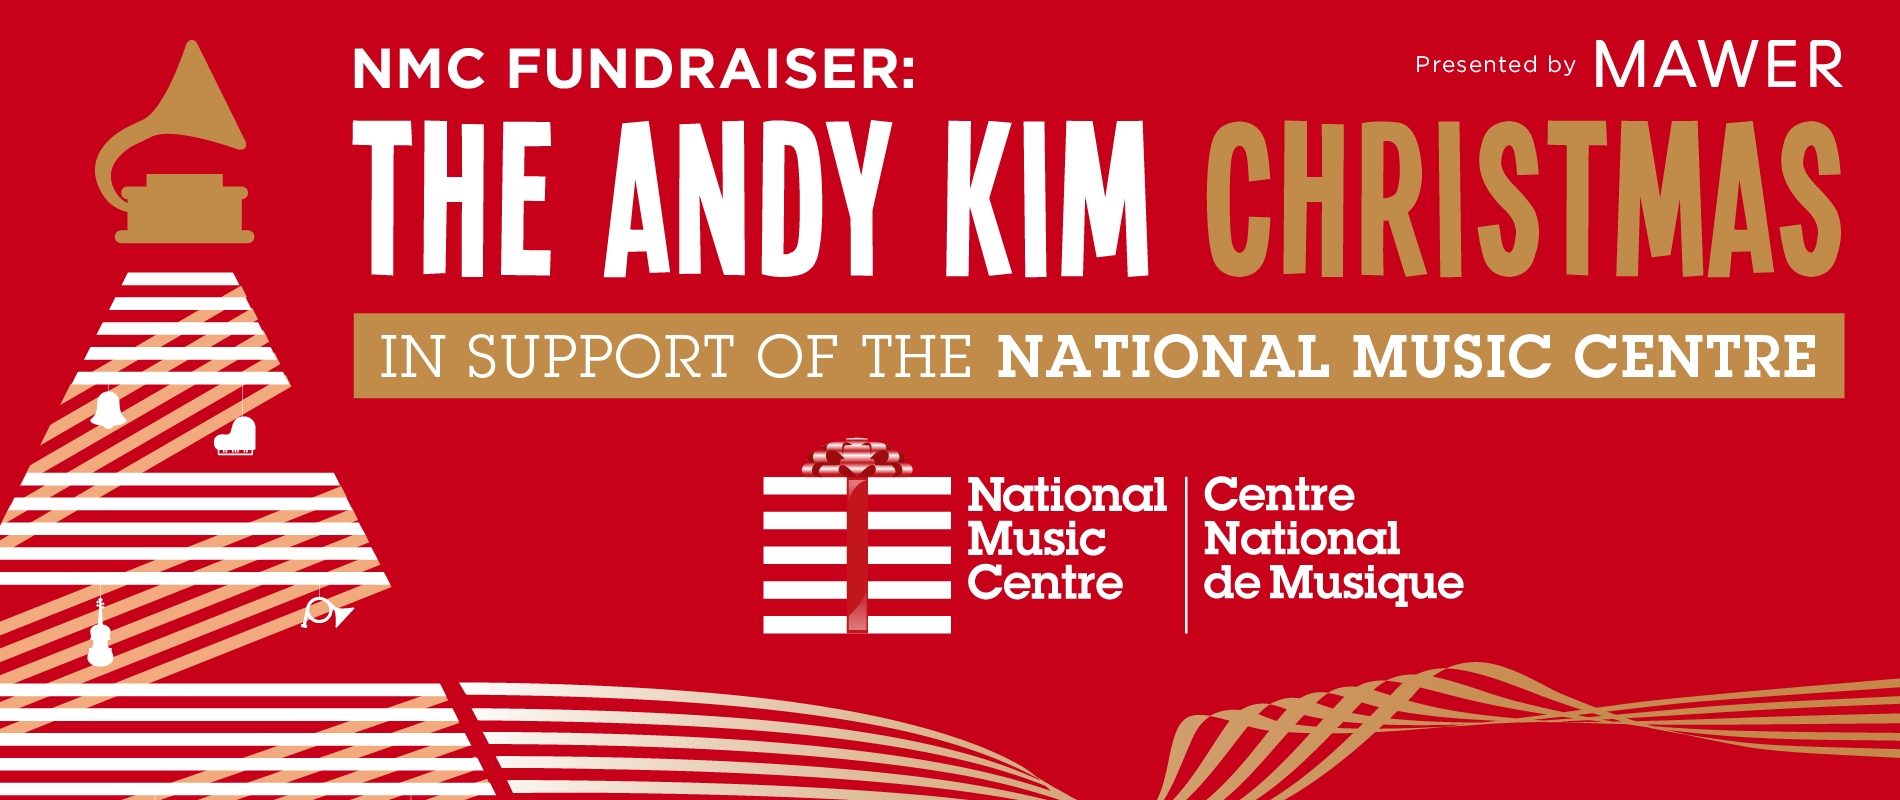 The Andy Kim Christmas in Support of National Music Centre Lands in Calgary on December 15